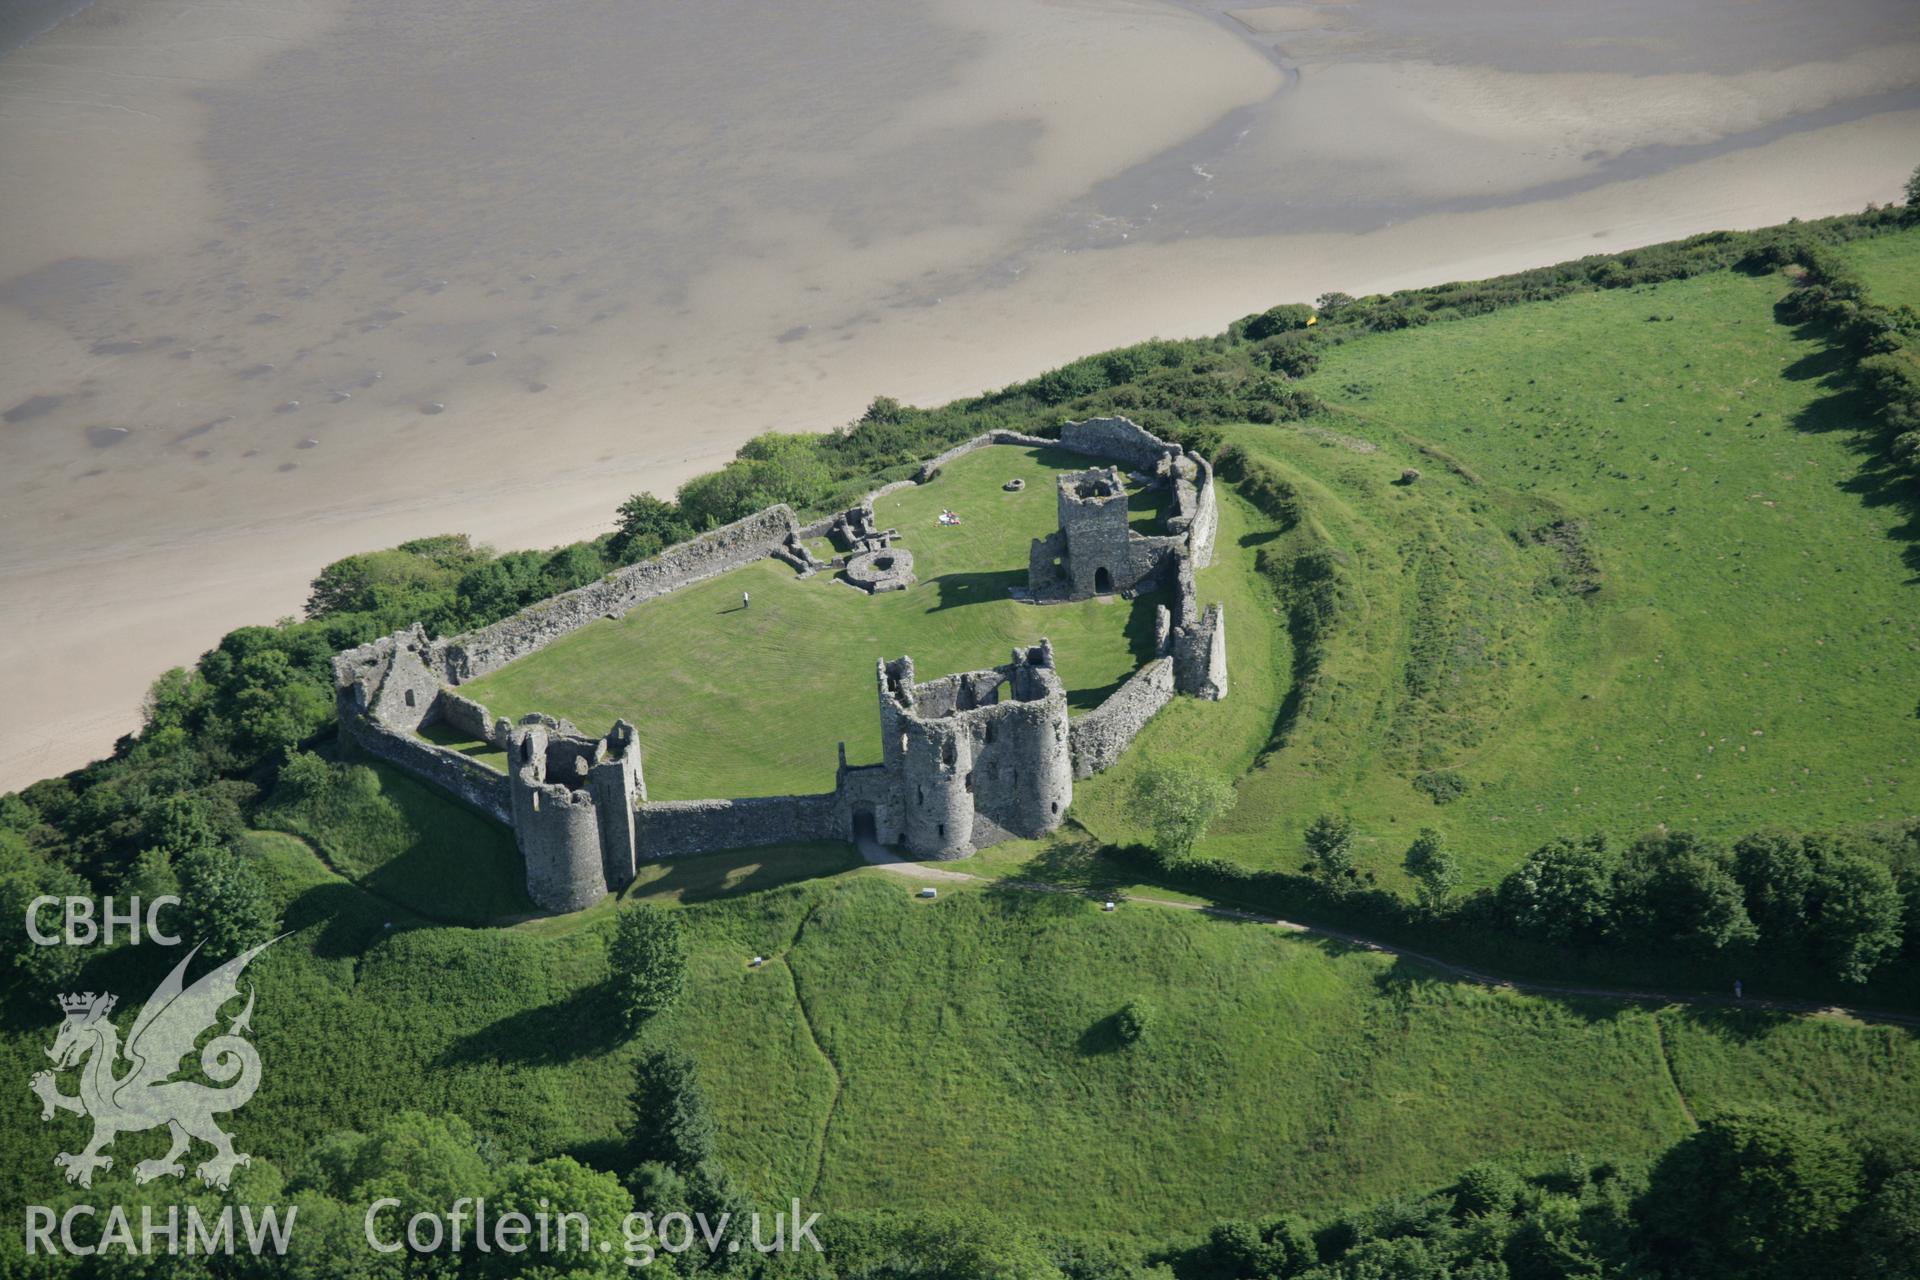 RCAHMW colour oblique aerial photograph of Llanstephan Castle, viewed from the north-east. Taken on 09 June 2005 by Toby Driver